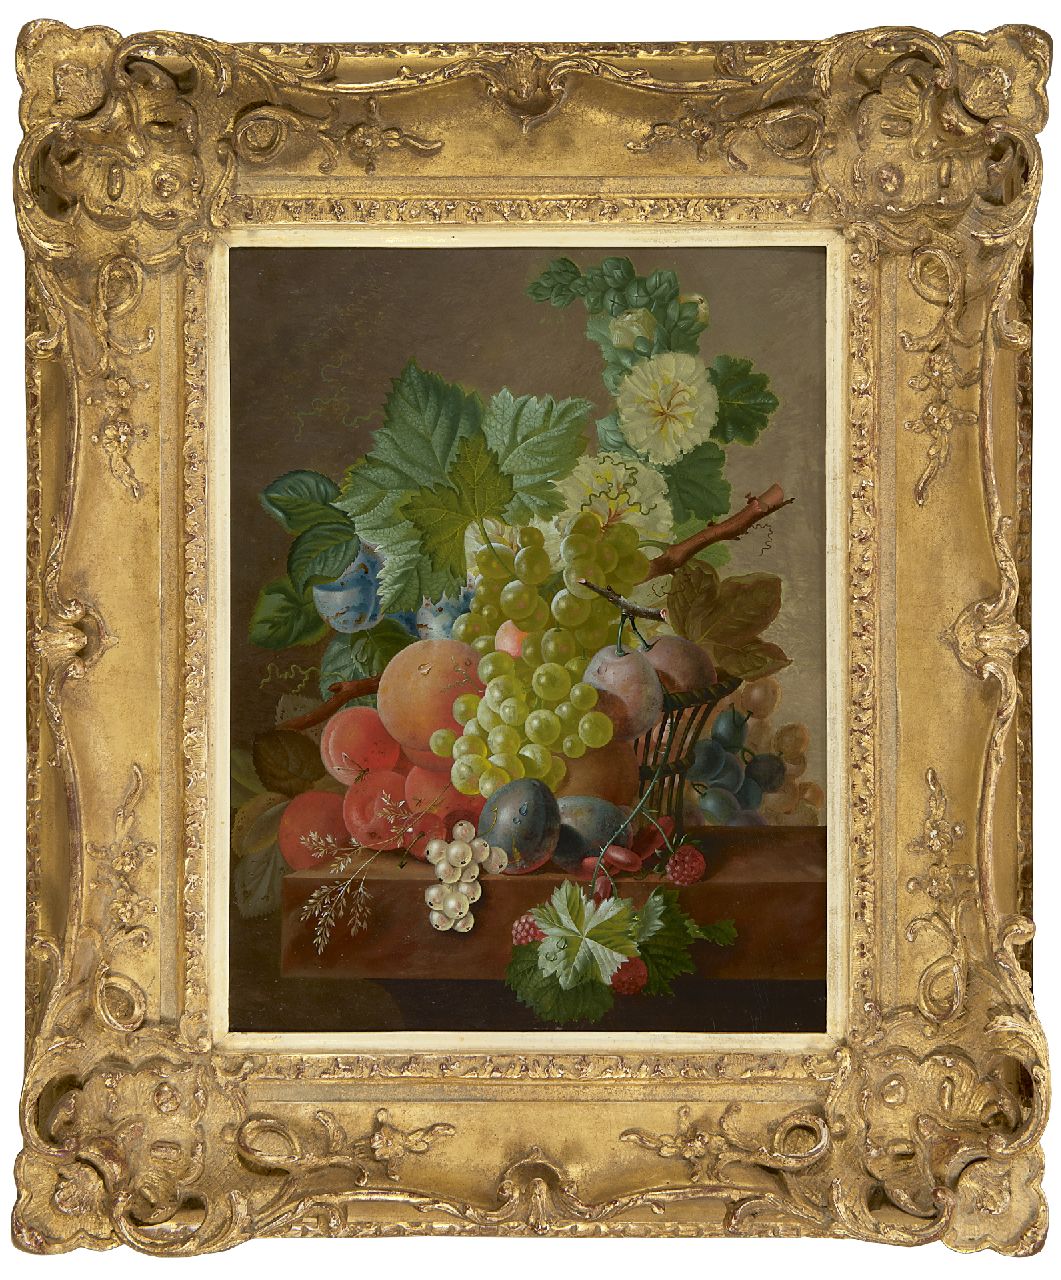 Bruyn J.C. de | Johannes Cornelis de Bruyn | Paintings offered for sale | Grapes, peaches and other fruit on a stone ledge, oil on panel 42.6 x 32.6 cm